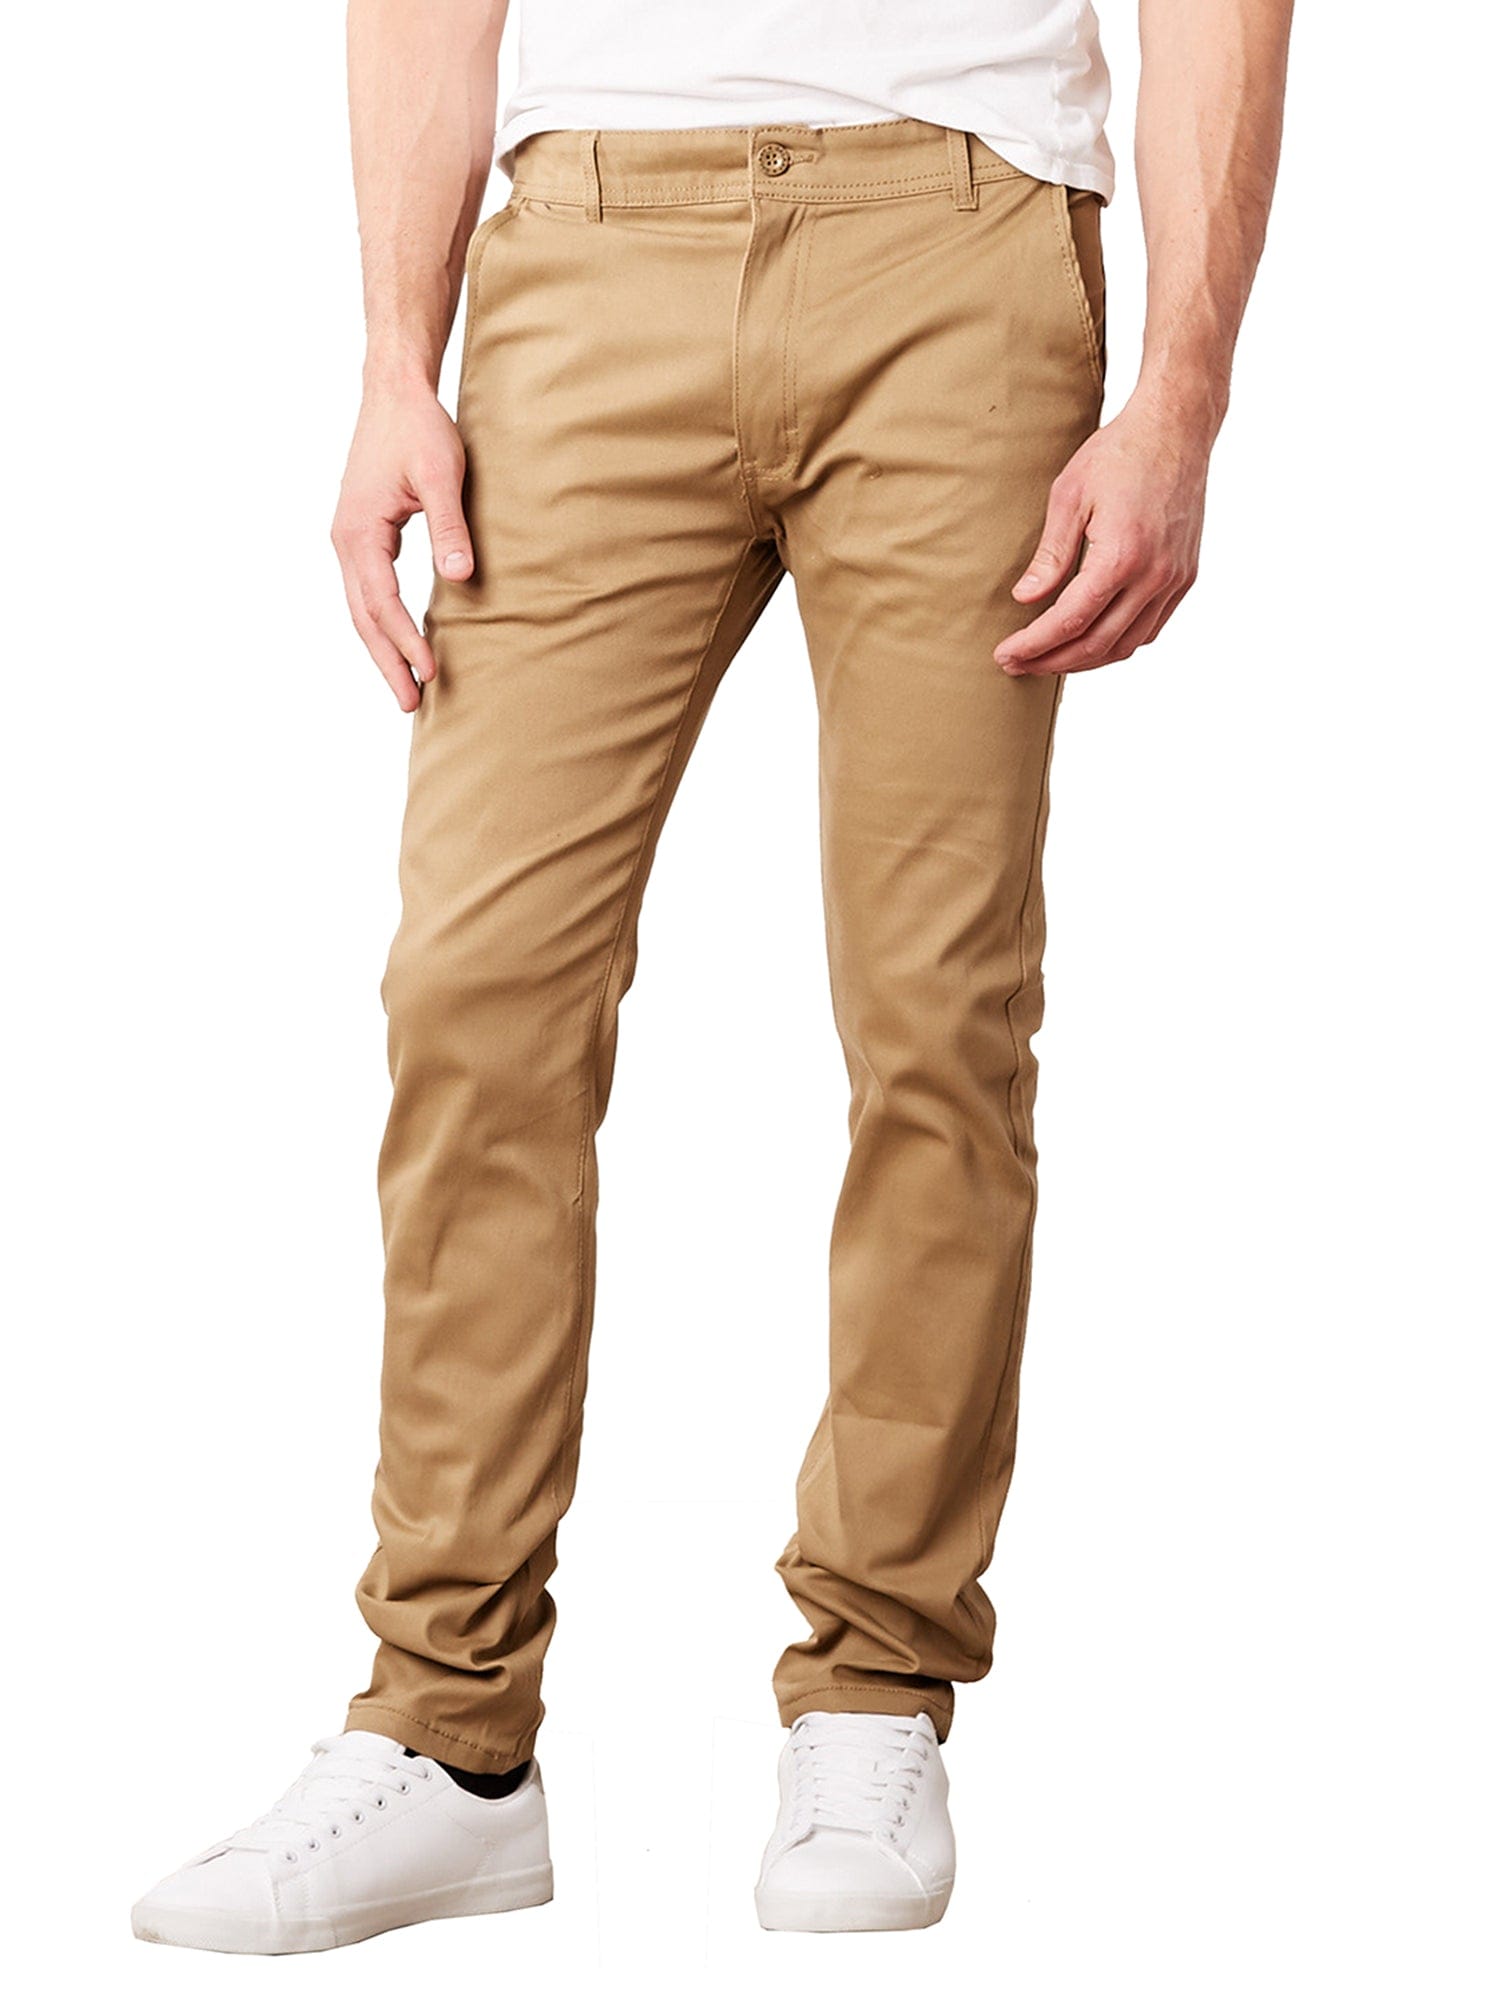 Classic Polo Men's Moderate Fit Cotton Trousers | CR-TRS-SATIN-BLACK M